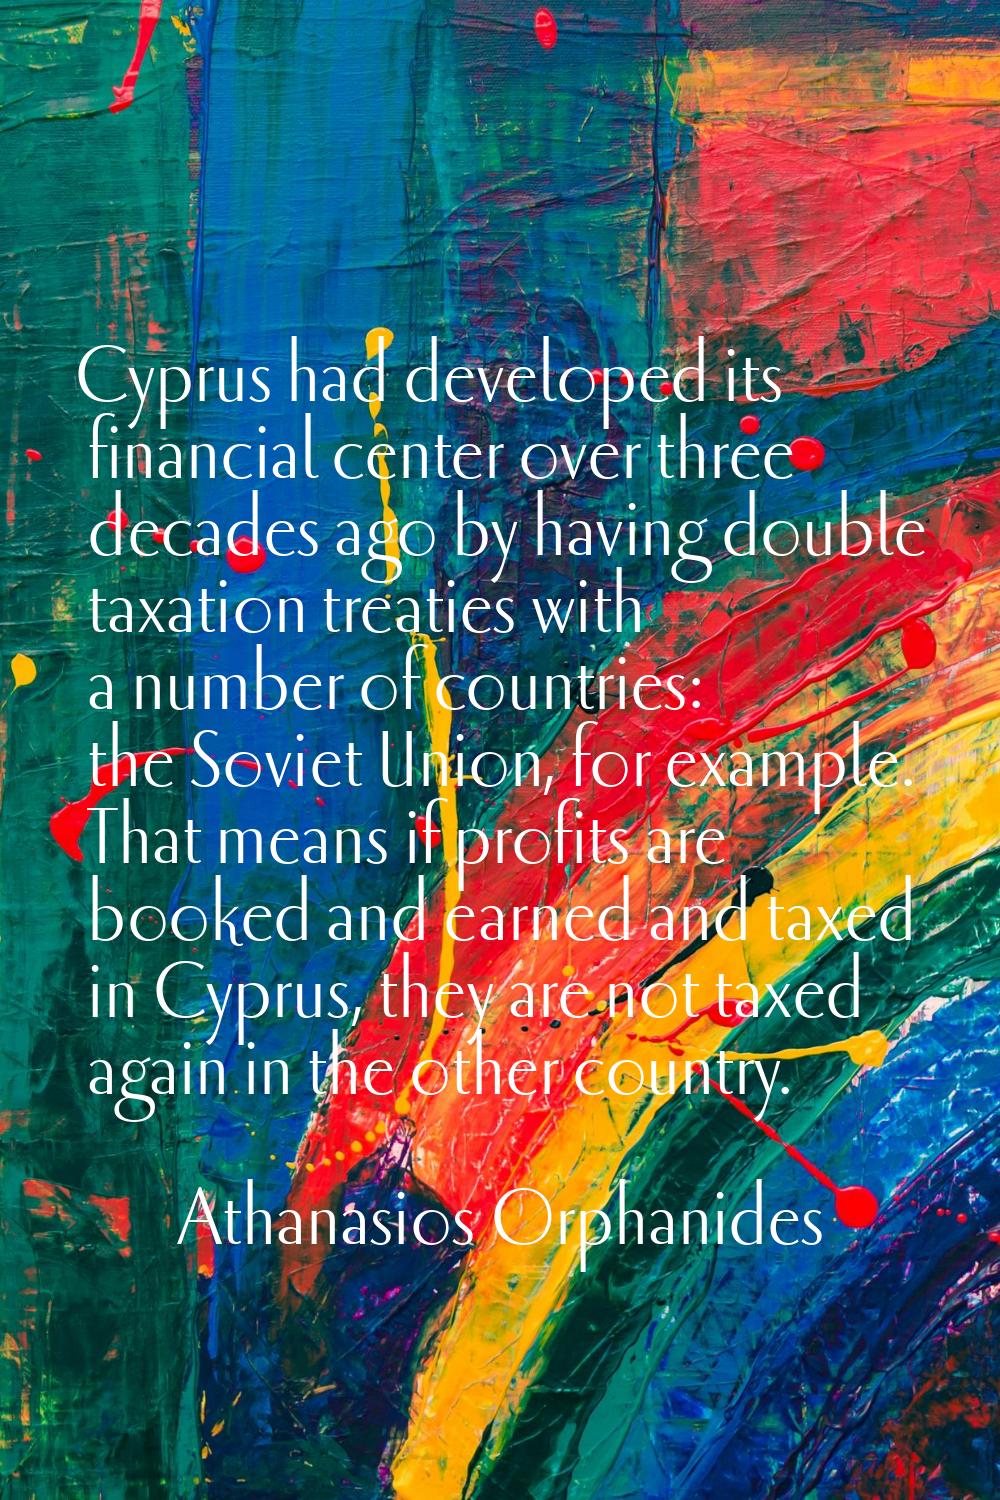 Cyprus had developed its financial center over three decades ago by having double taxation treaties